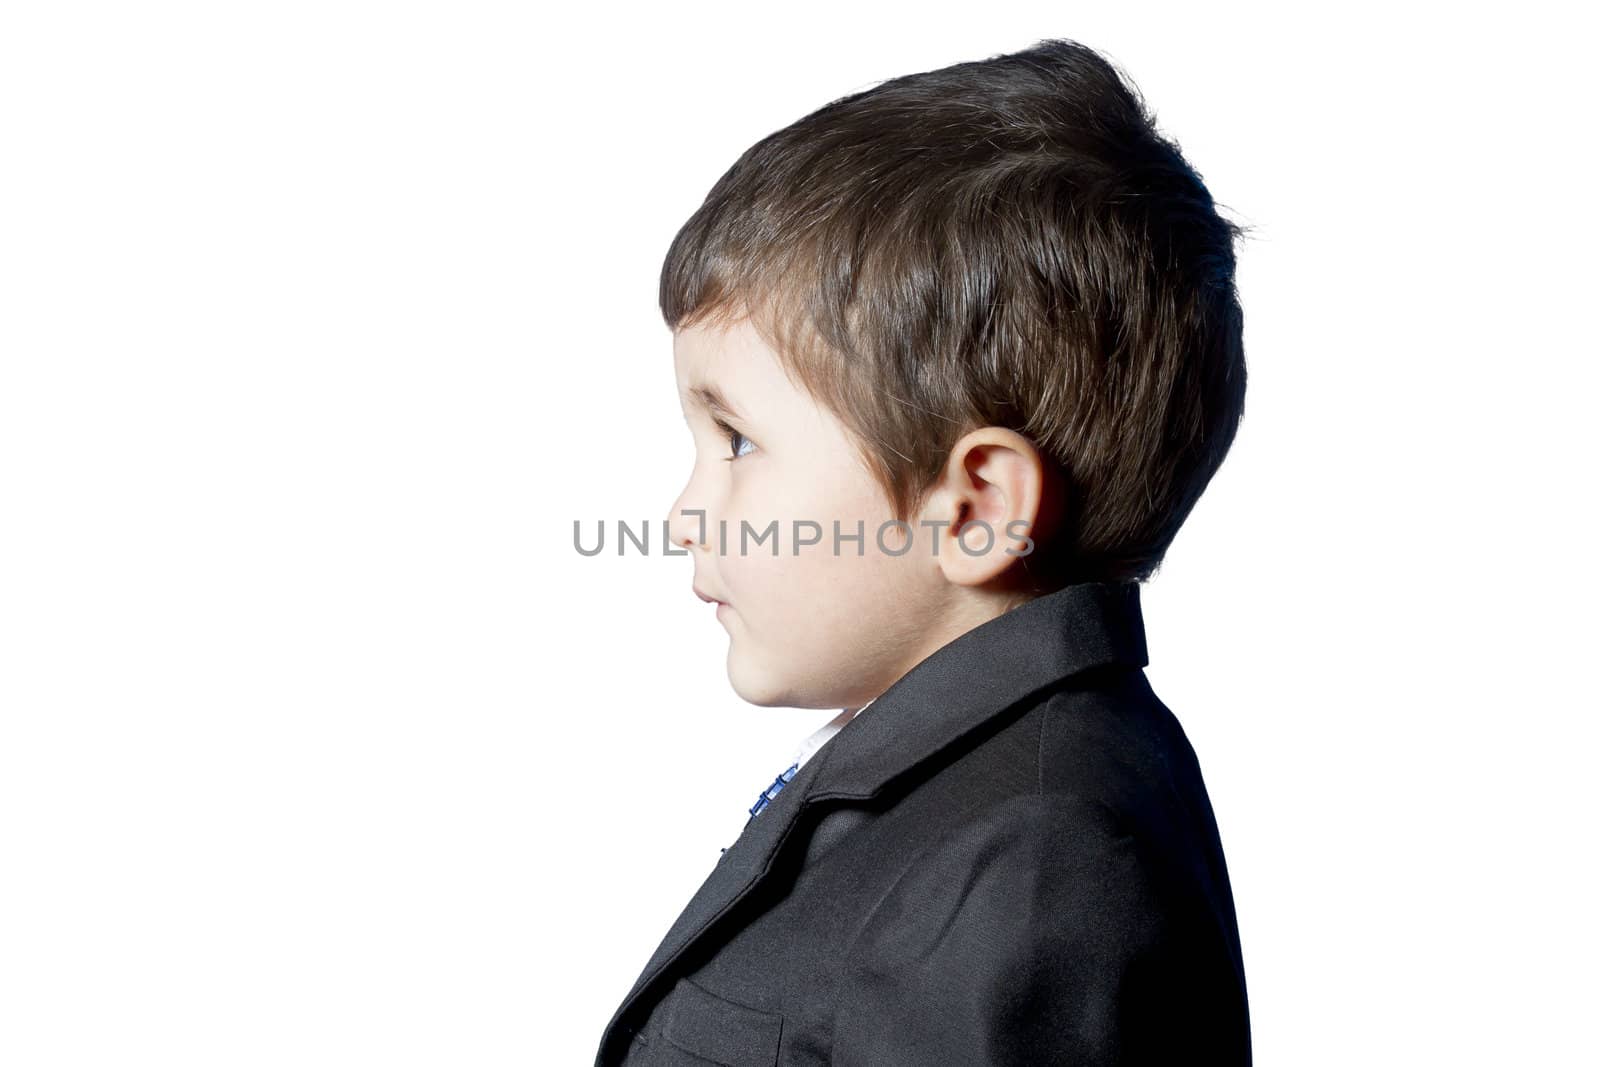 Child dressed in suit and tie